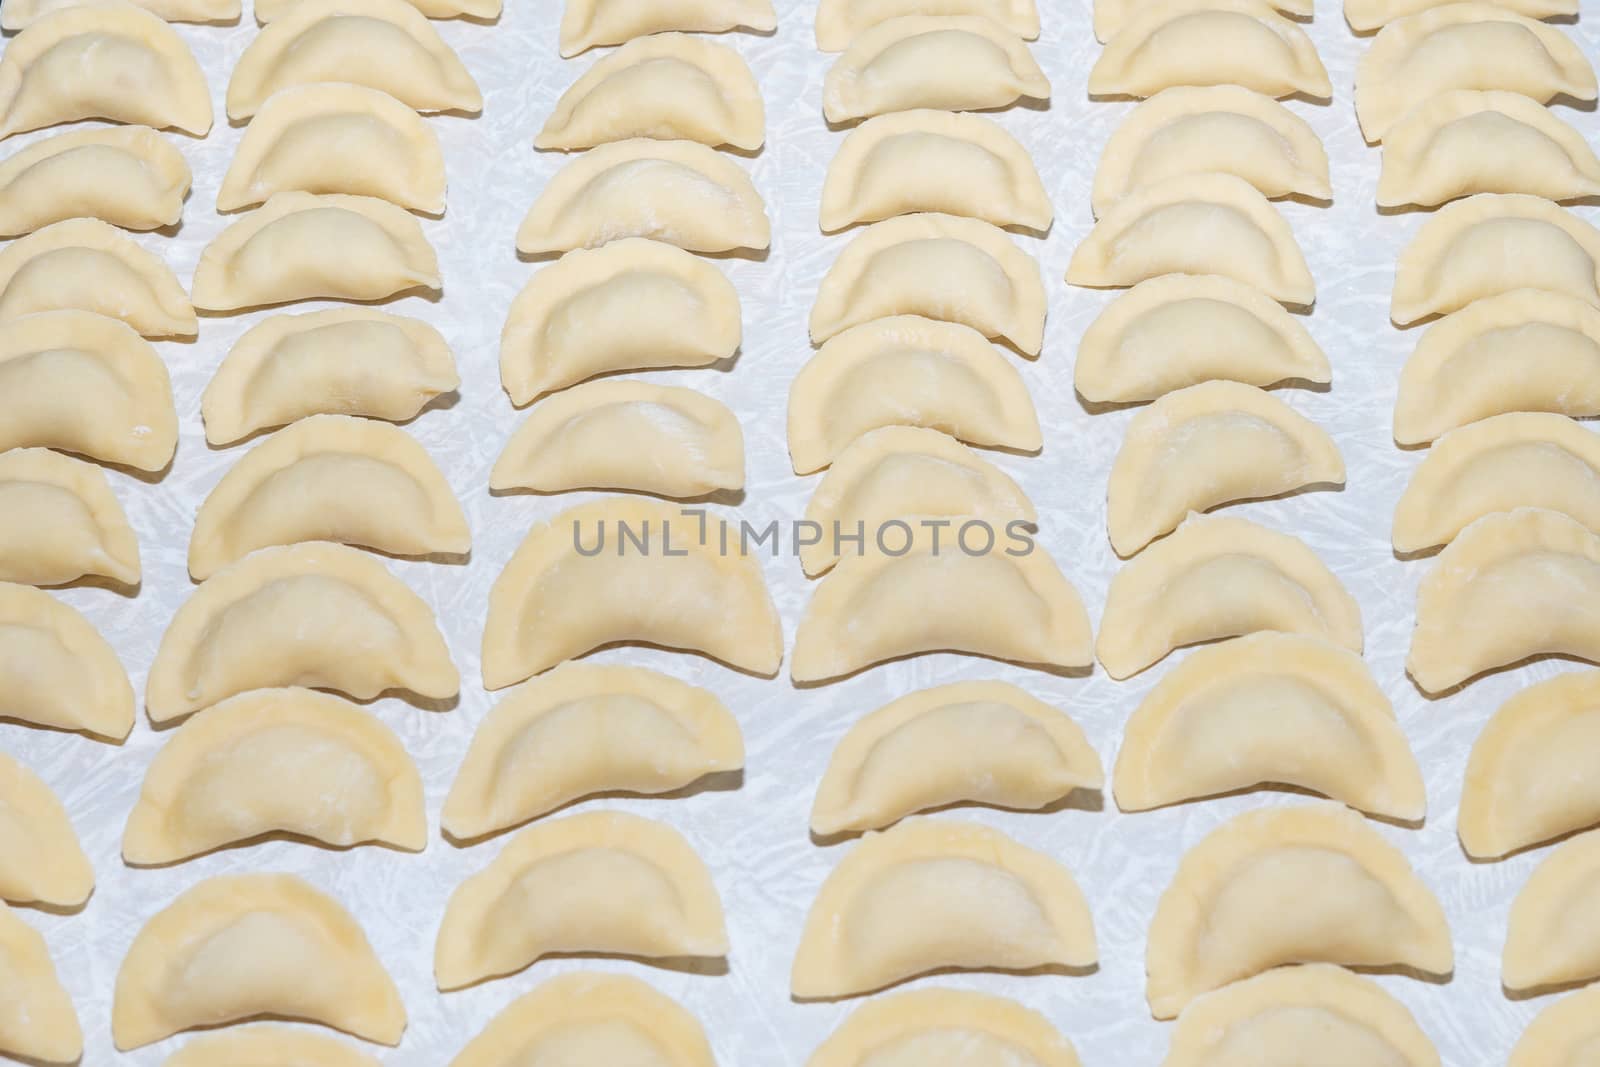 homemade delicious handmade dumplings are dusted with flour and await cooking by Serhii_Voroshchuk